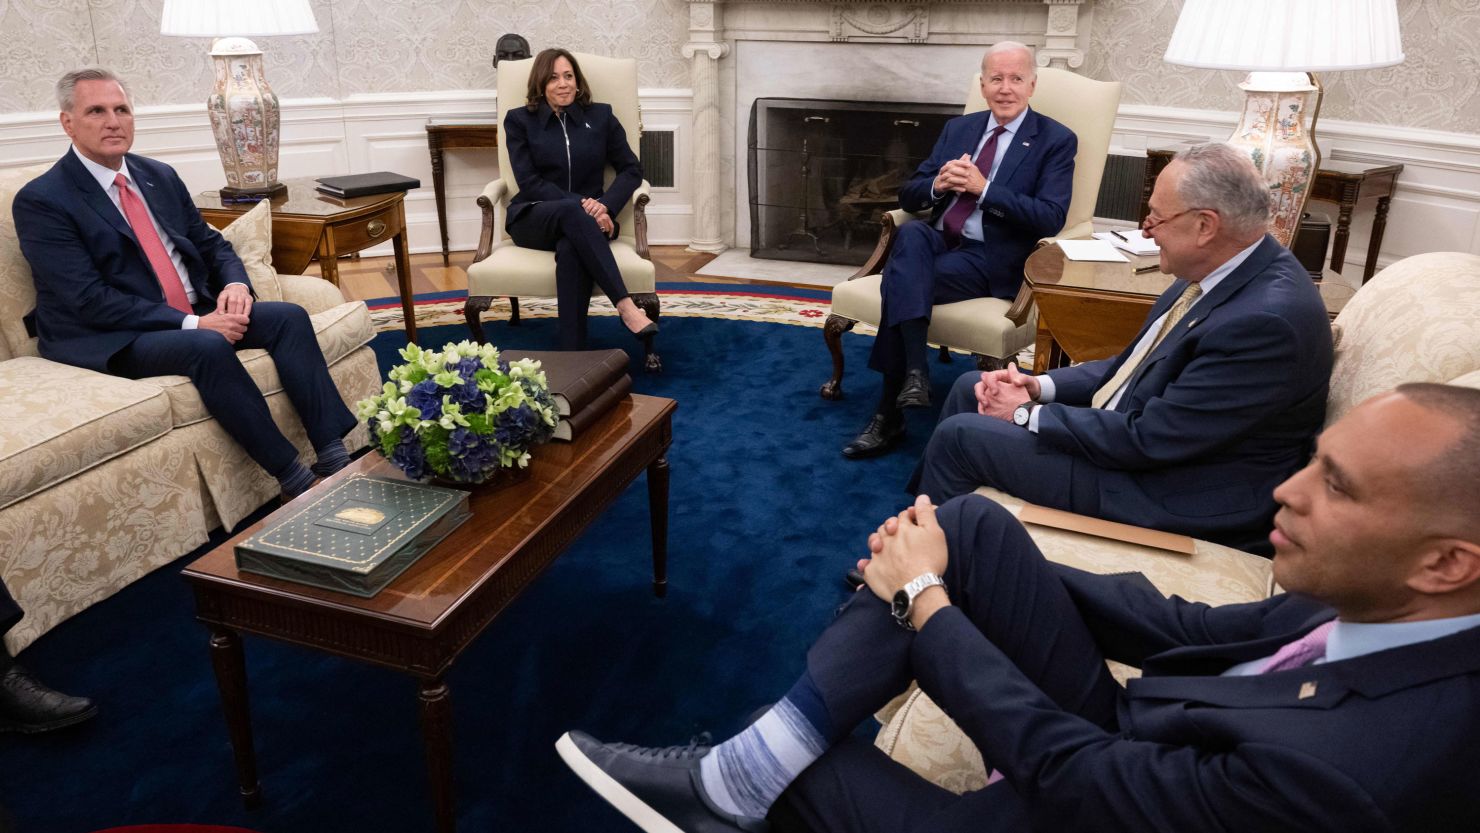 President Joe Biden speaks during a meeting on the debt limit with House Speaker Kevin McCarthy, Vice President Kamala Harris, Senate Majority Leader Chuck Schumer and House Minority Leader Hakeem Jeffries in the Oval Office of the White House in Washington, DC, on May 16.